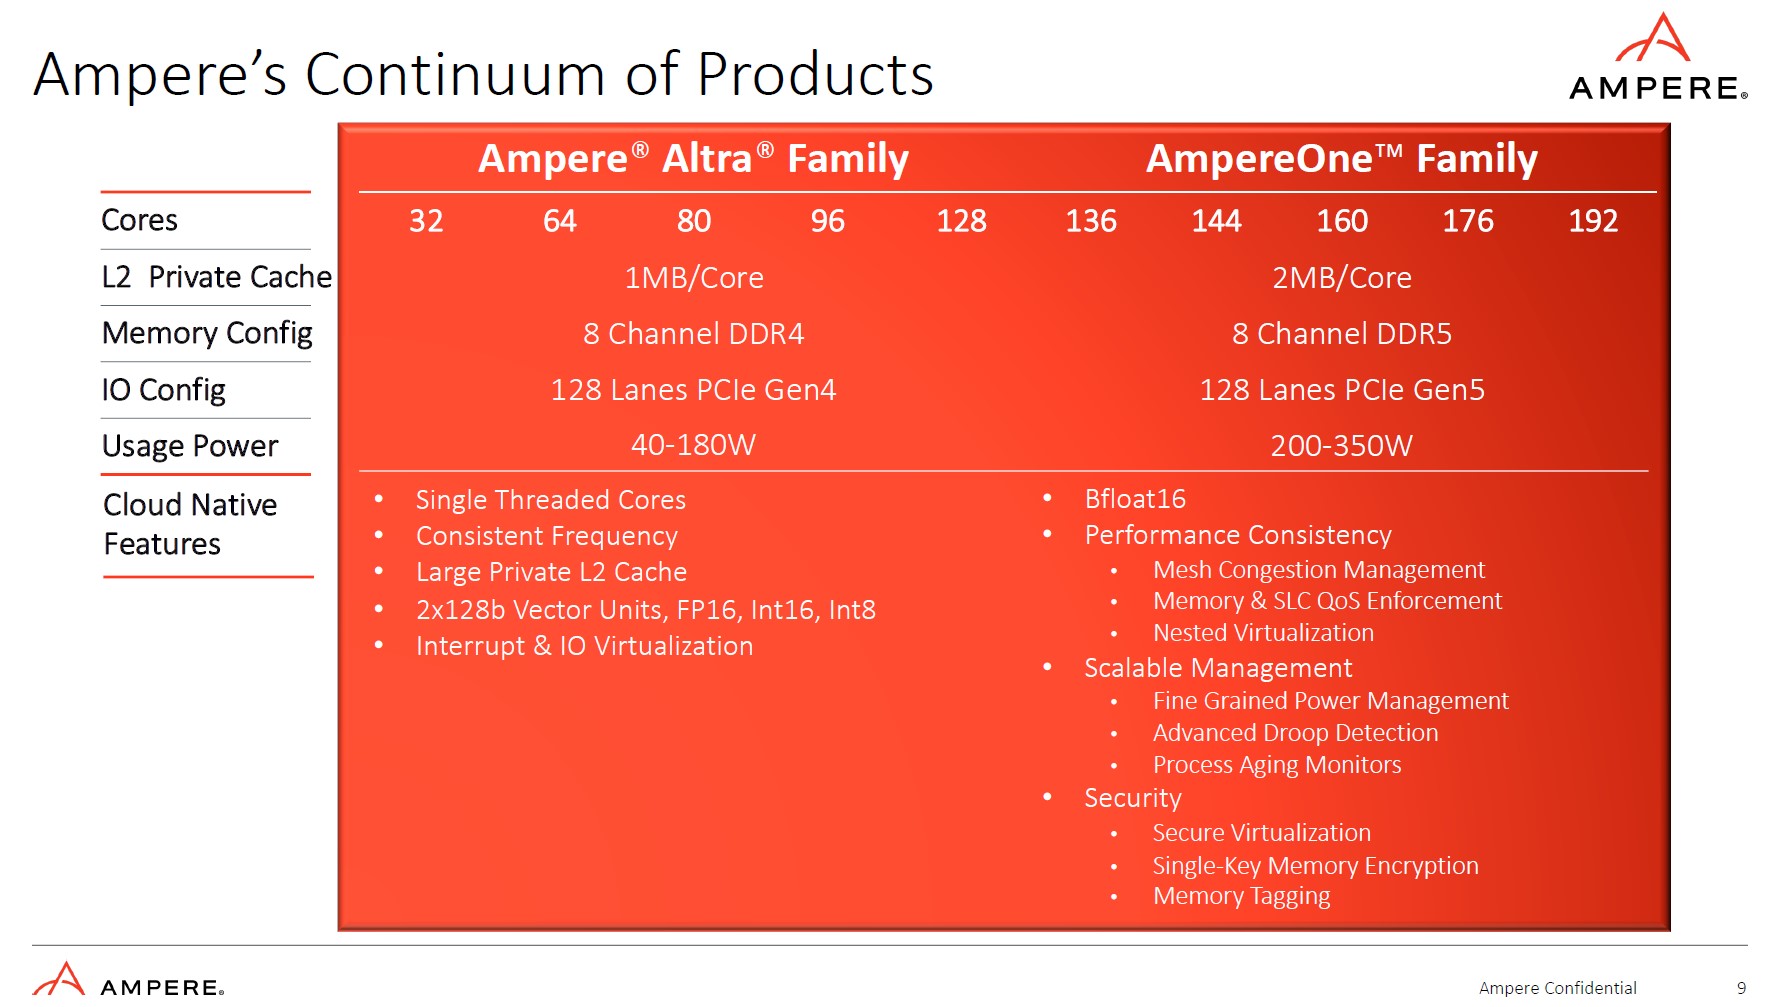 Ampere Altra Family Efficiency